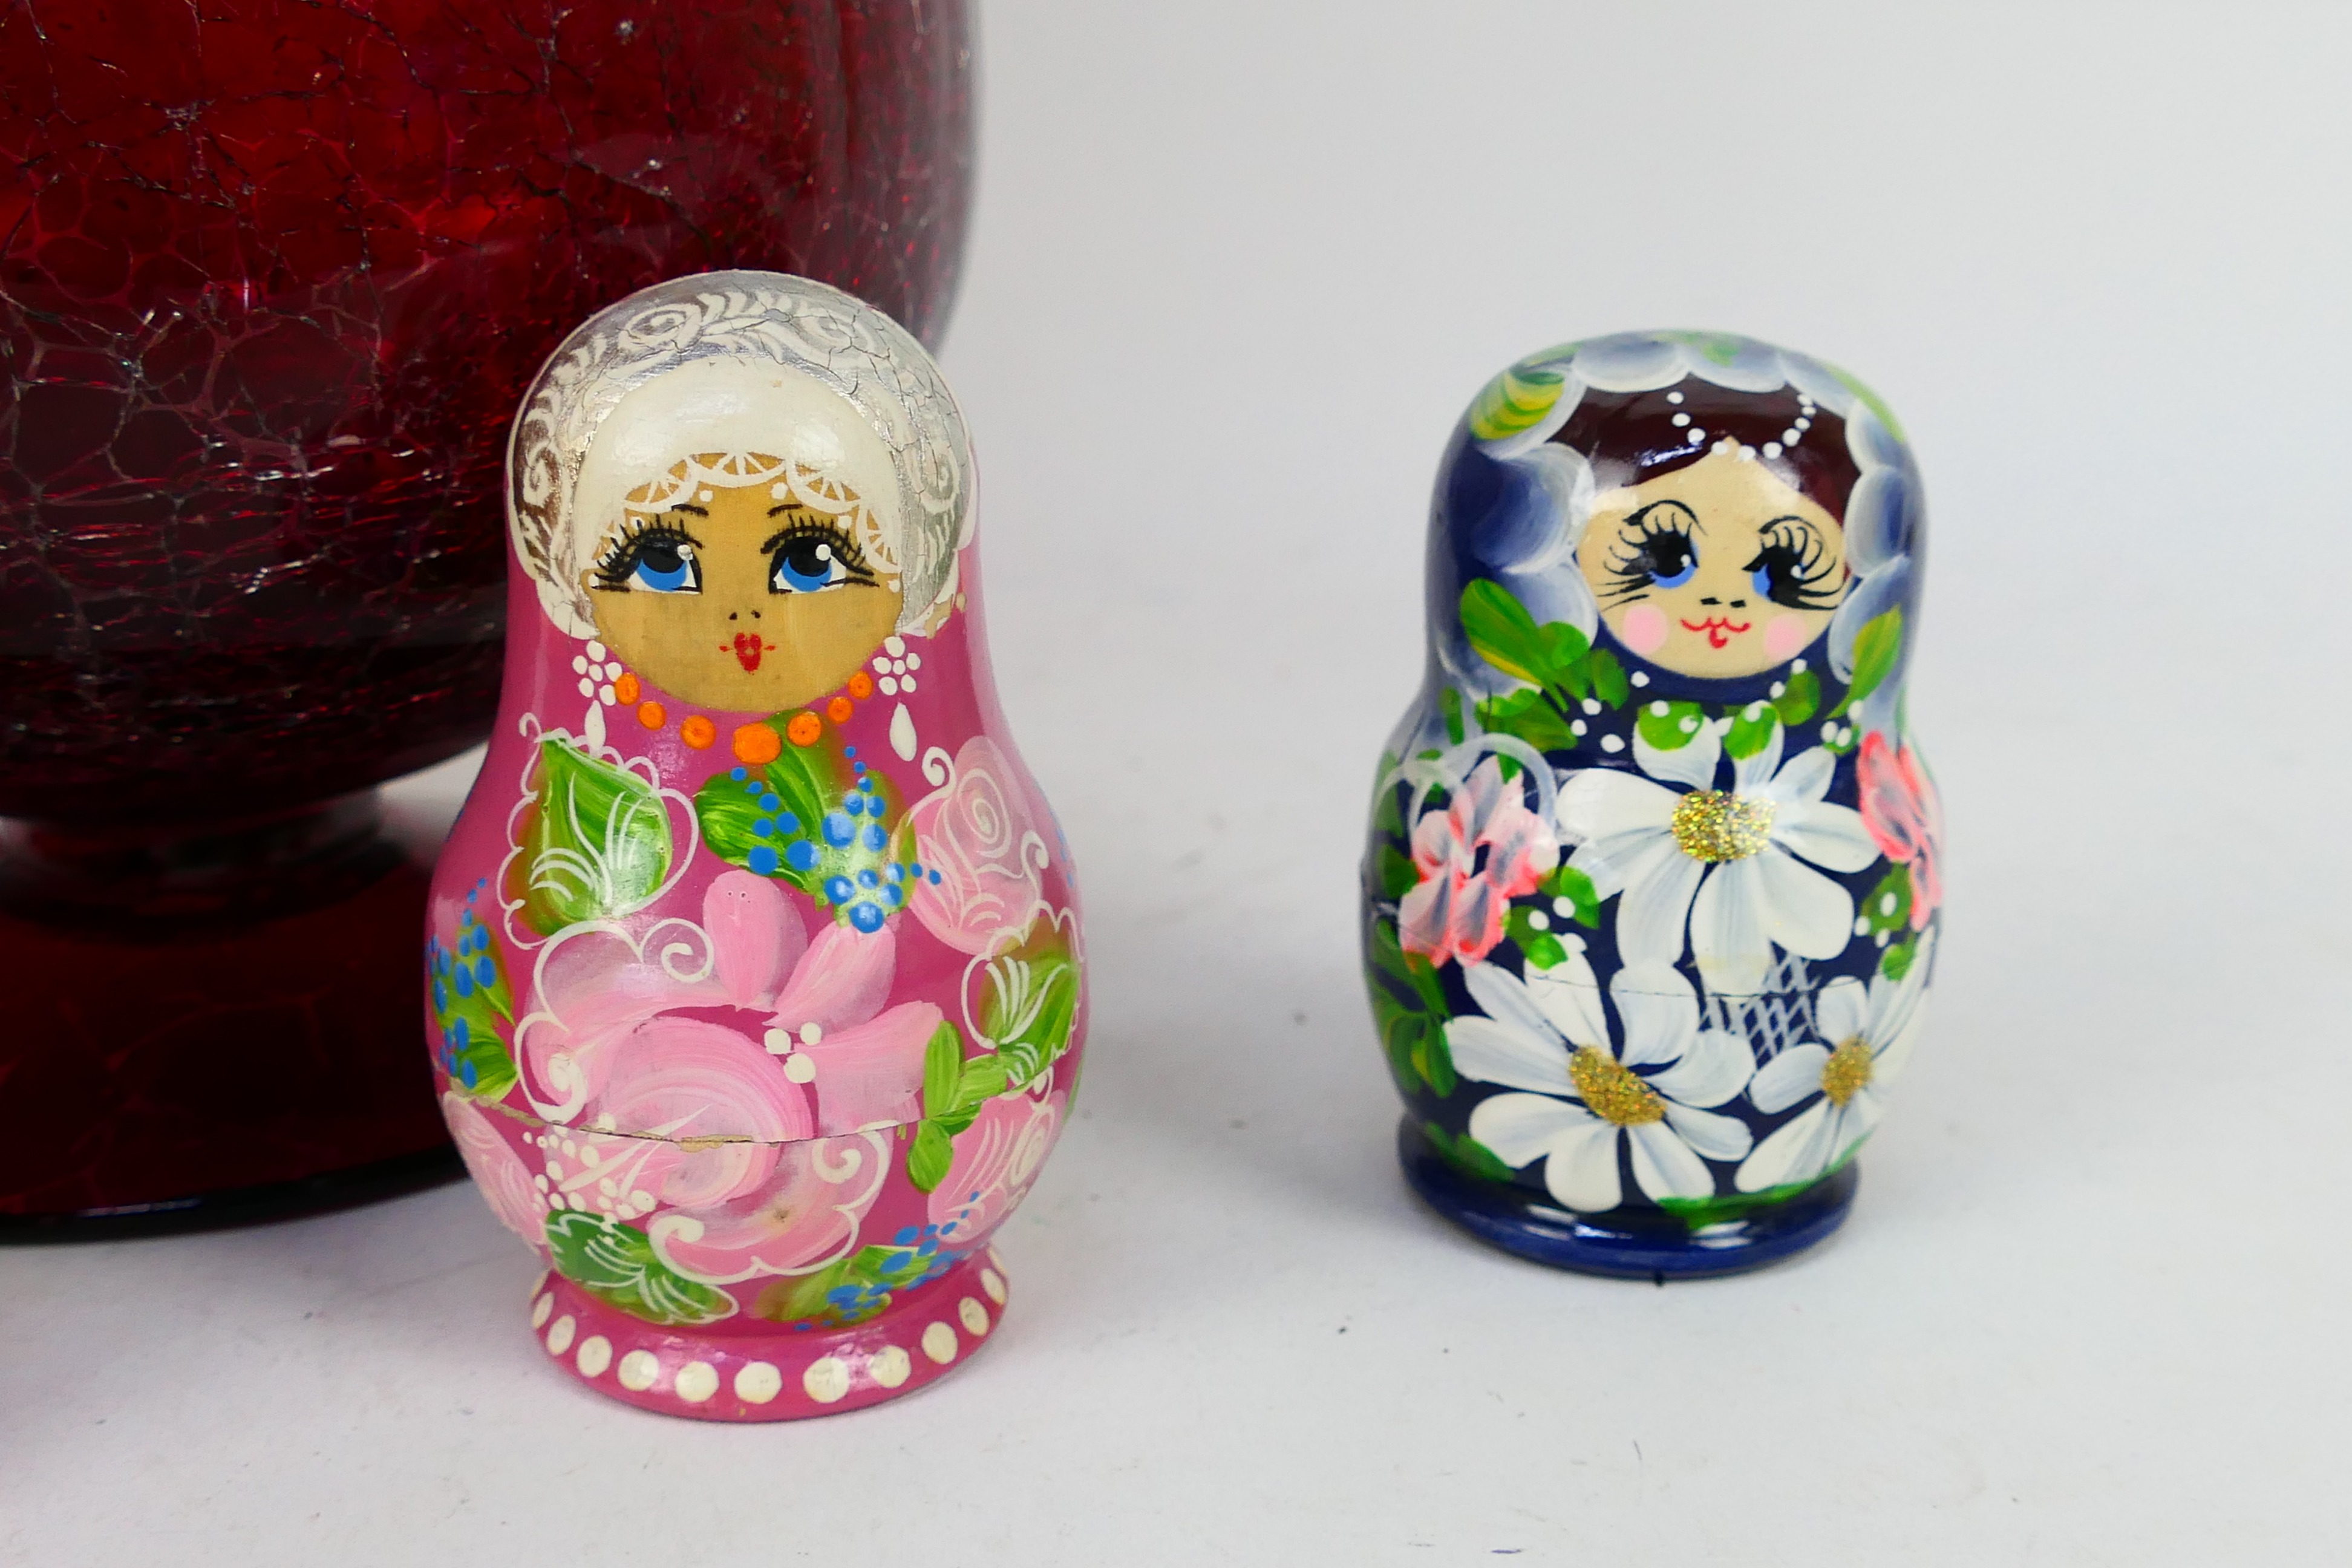 A decorative windlight candle holder, 30 cm (h) and four set of Russian matryoshka nesting dolls, - Image 3 of 3